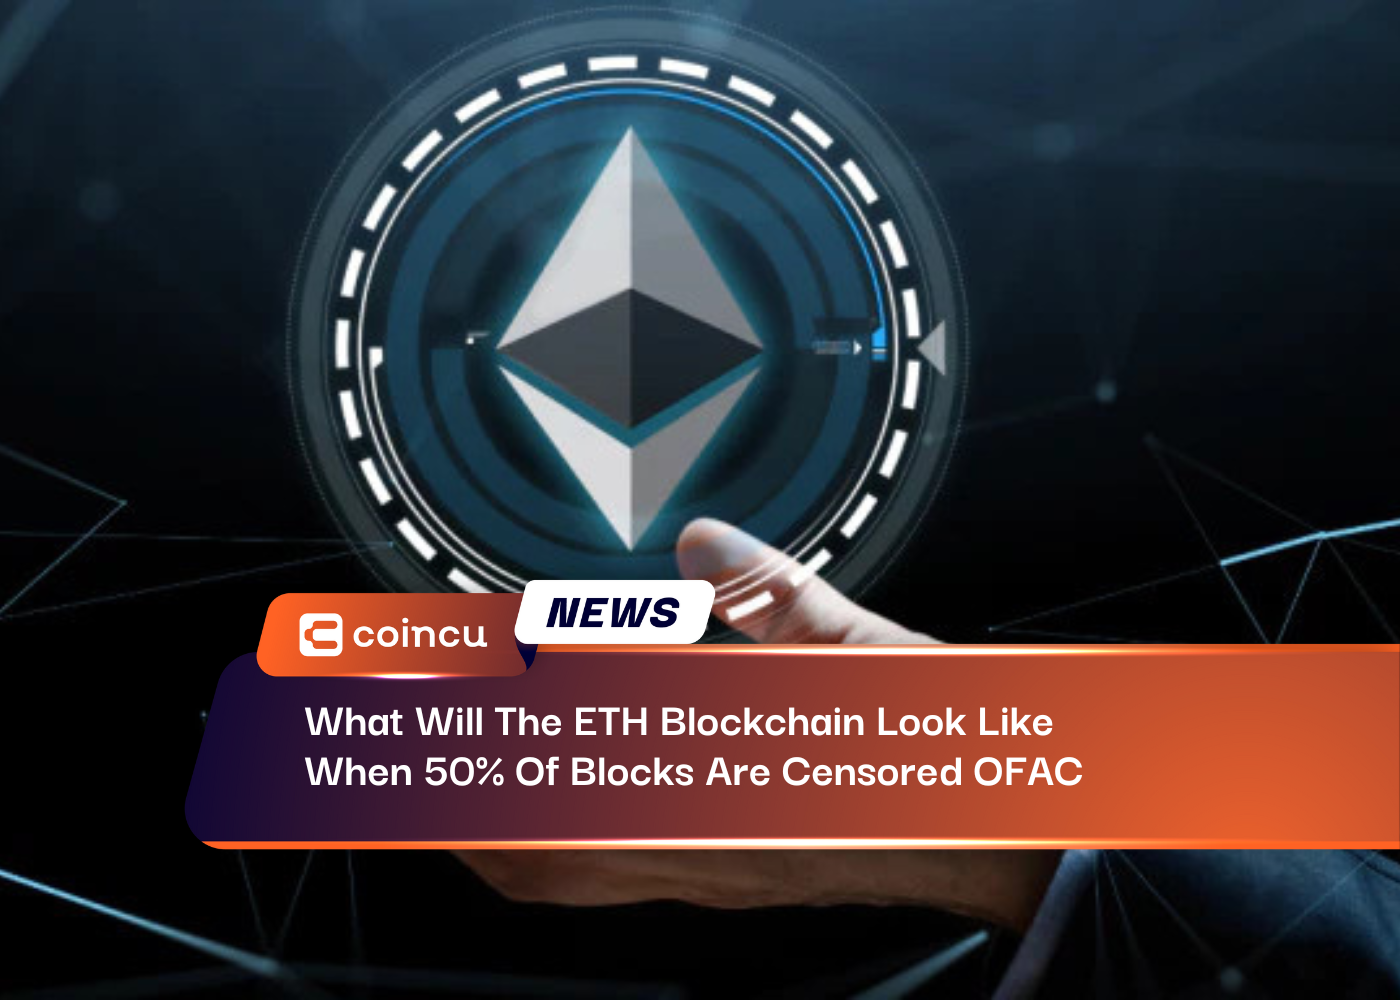 What Will The ETH Blockchain Look Like When 50% Of Blocks Are Censored OFAC